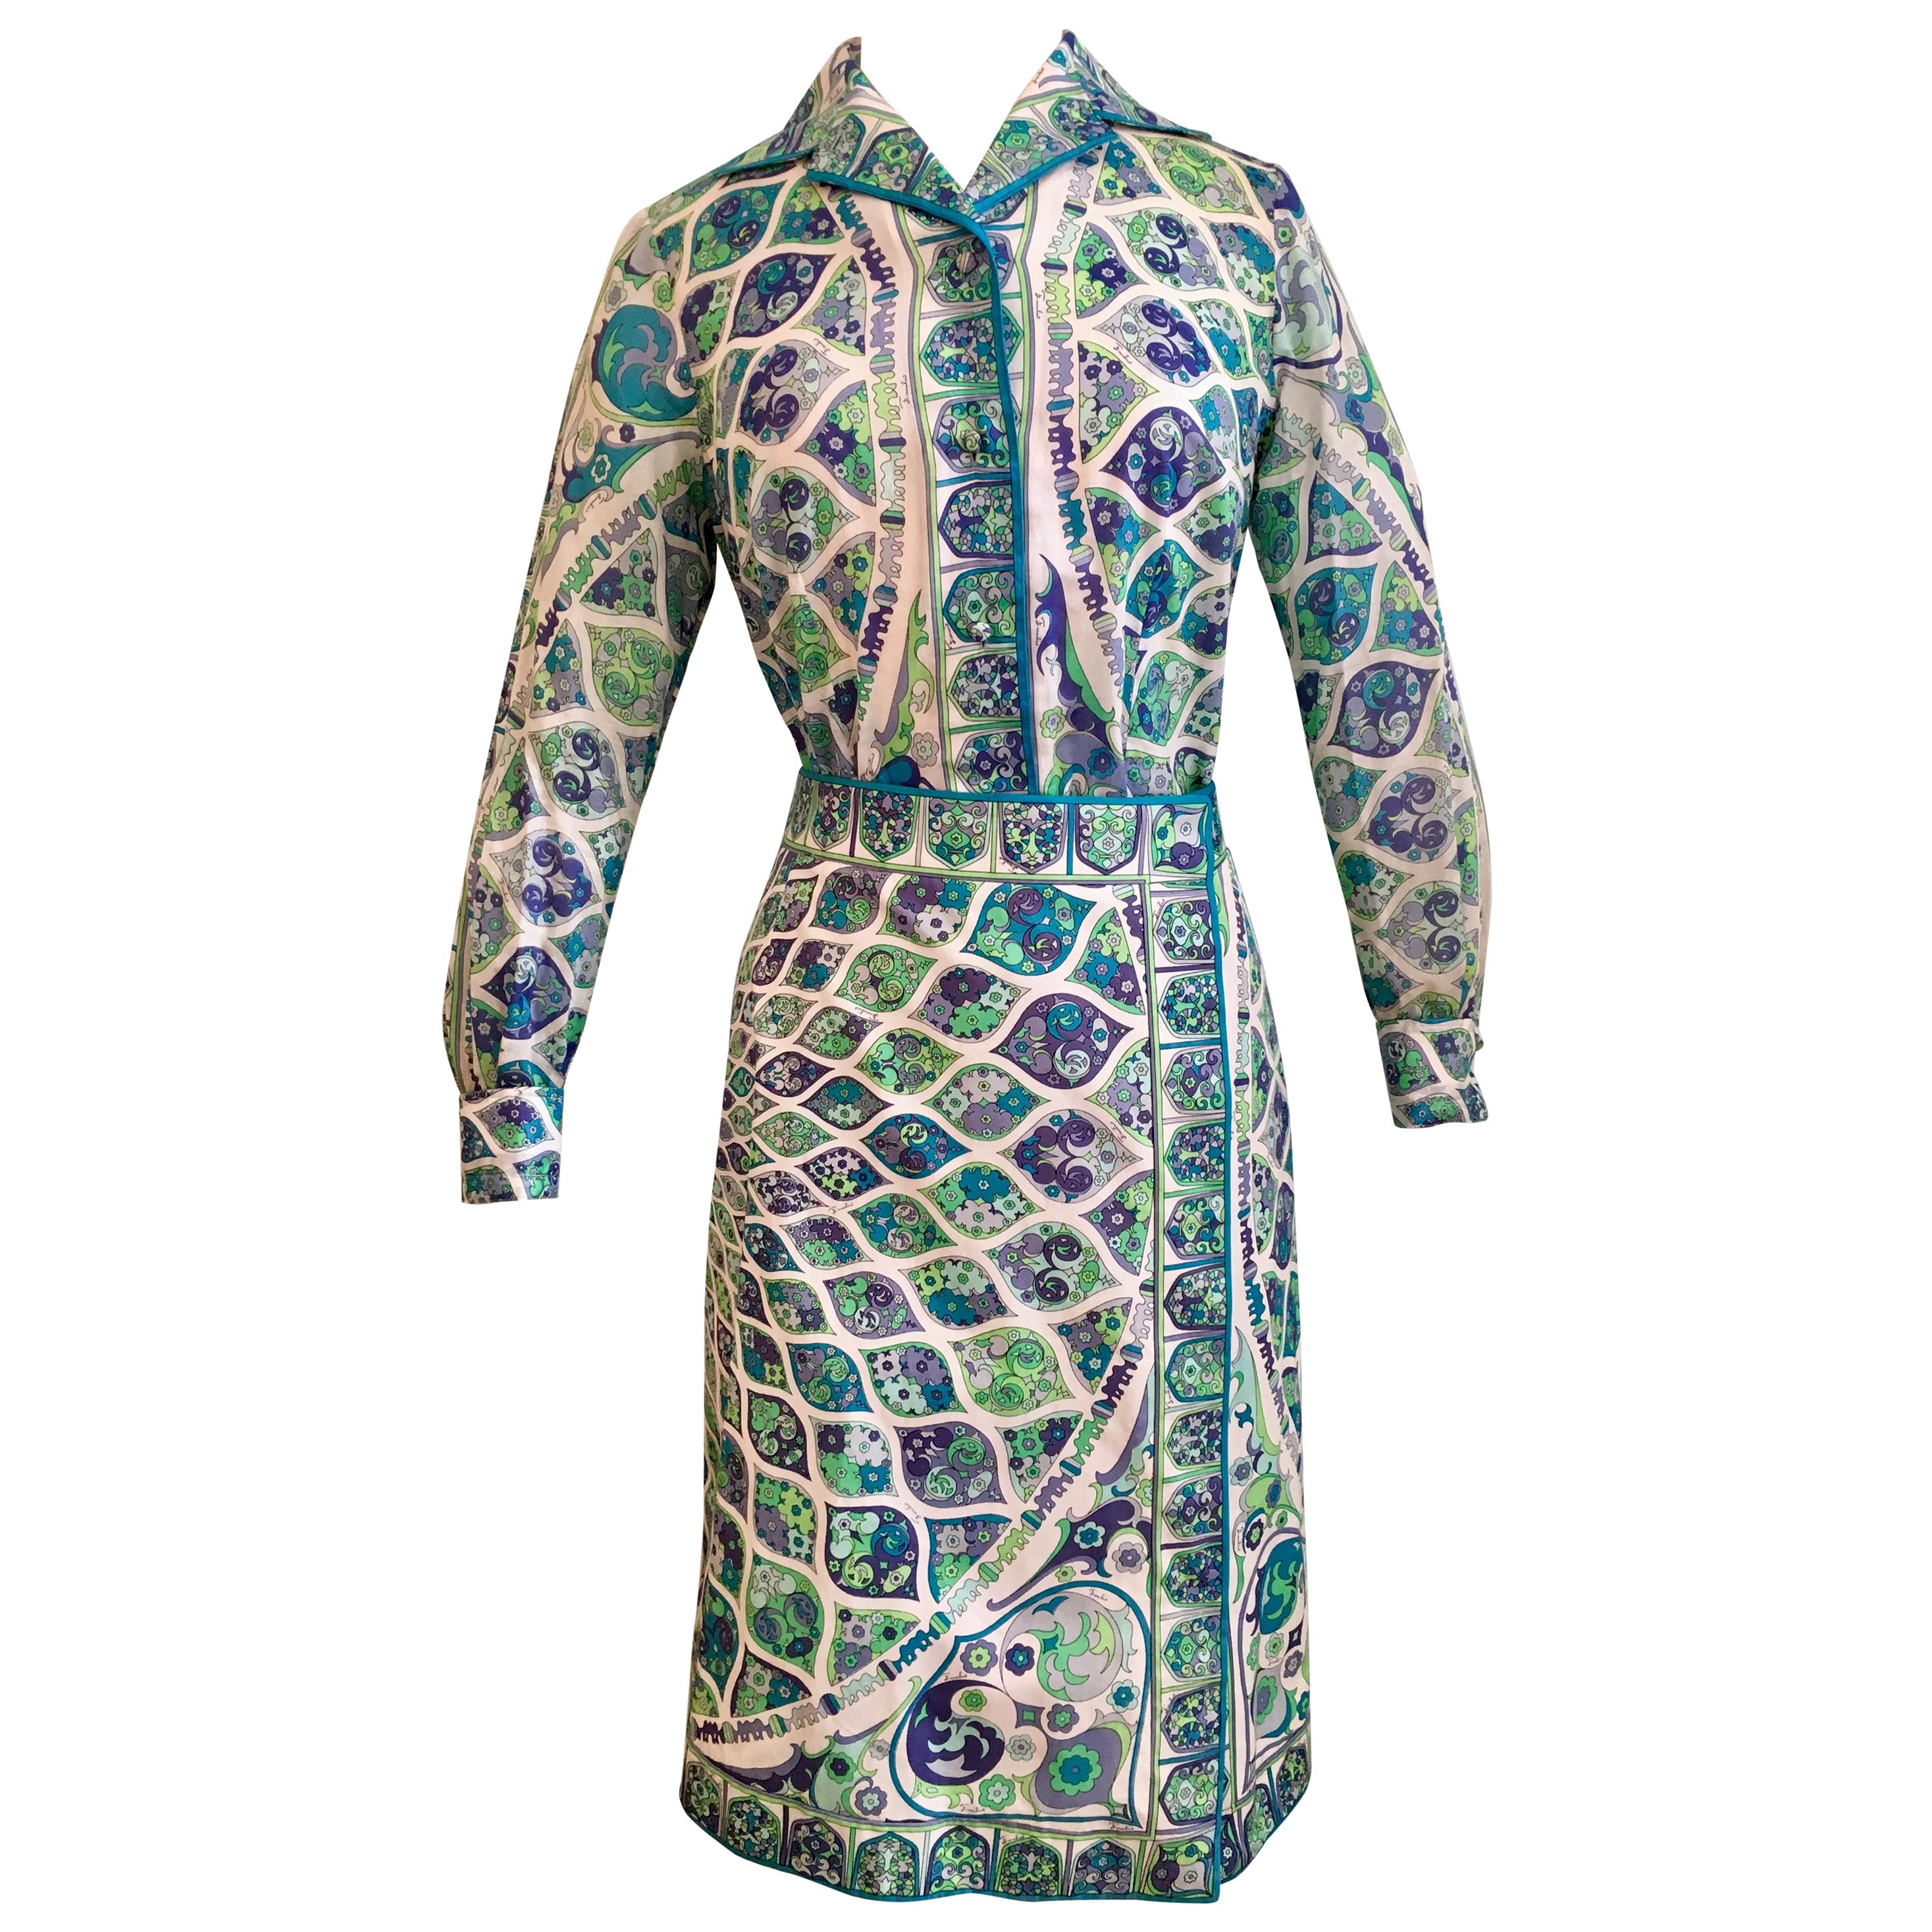 Emilio Pucci Green, Lavender, Blue and Purple Cotton Blouse and Skirt Set 1960s For Sale